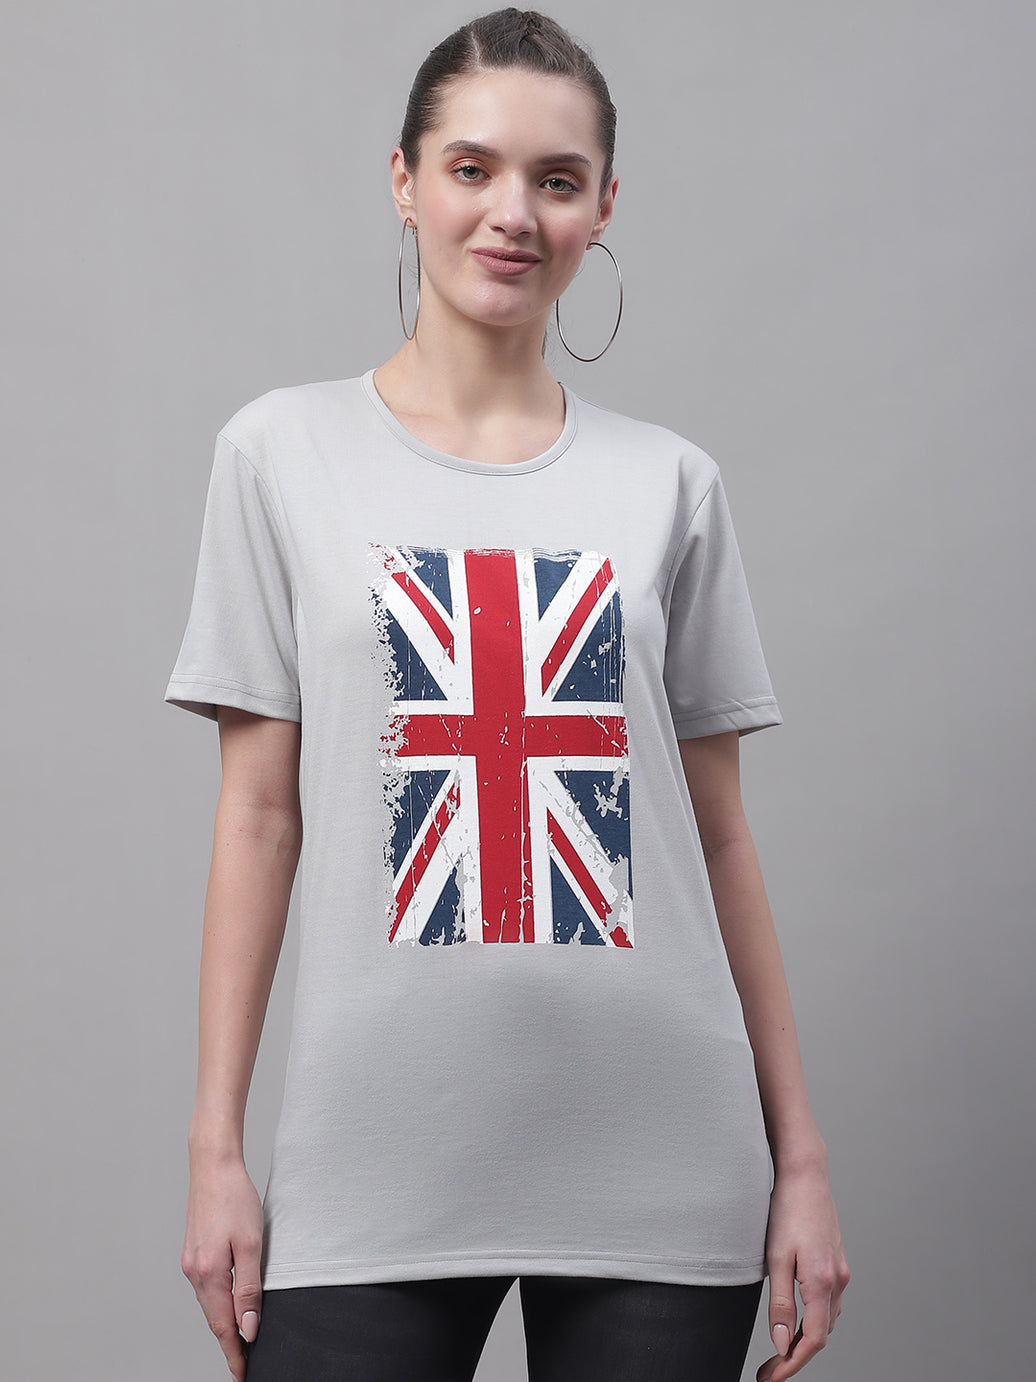 Buy Elegant Cotton Grey Love Billi Print T-Shirt For Women Online In India  At Discounted Prices